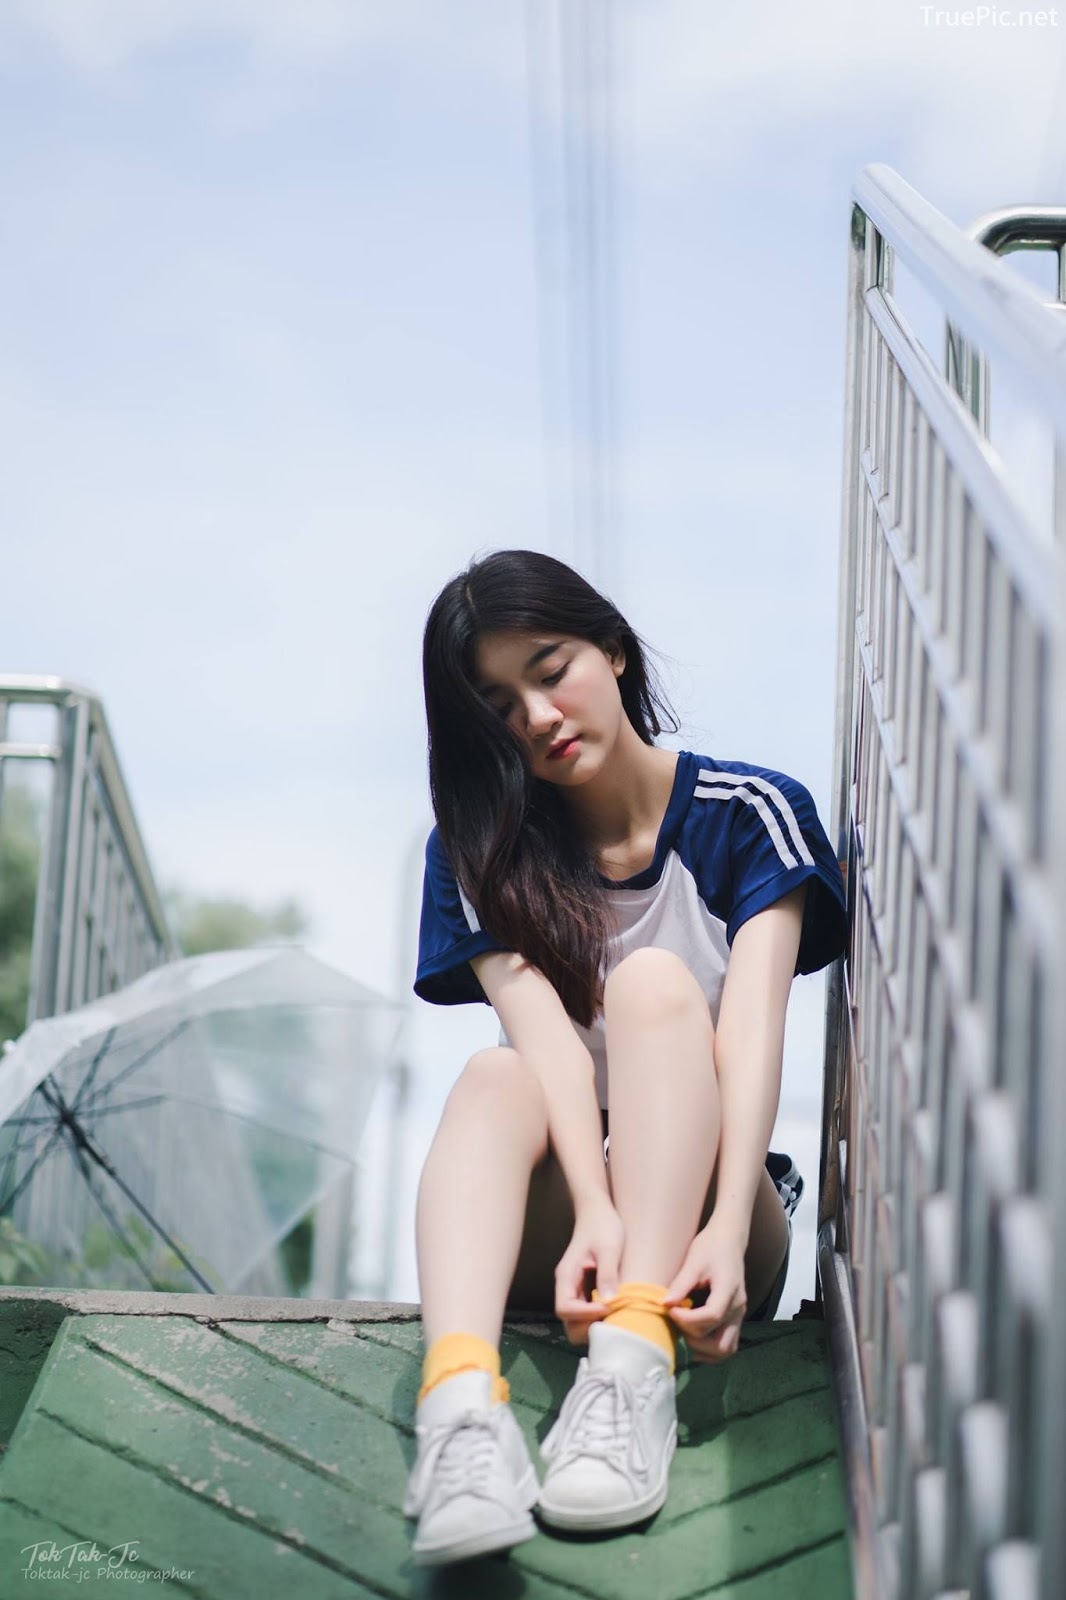 Hot Girl Thailand - Sasi Ngiunwan - Scenes From an Empty City - TruePic.net - Picture 15